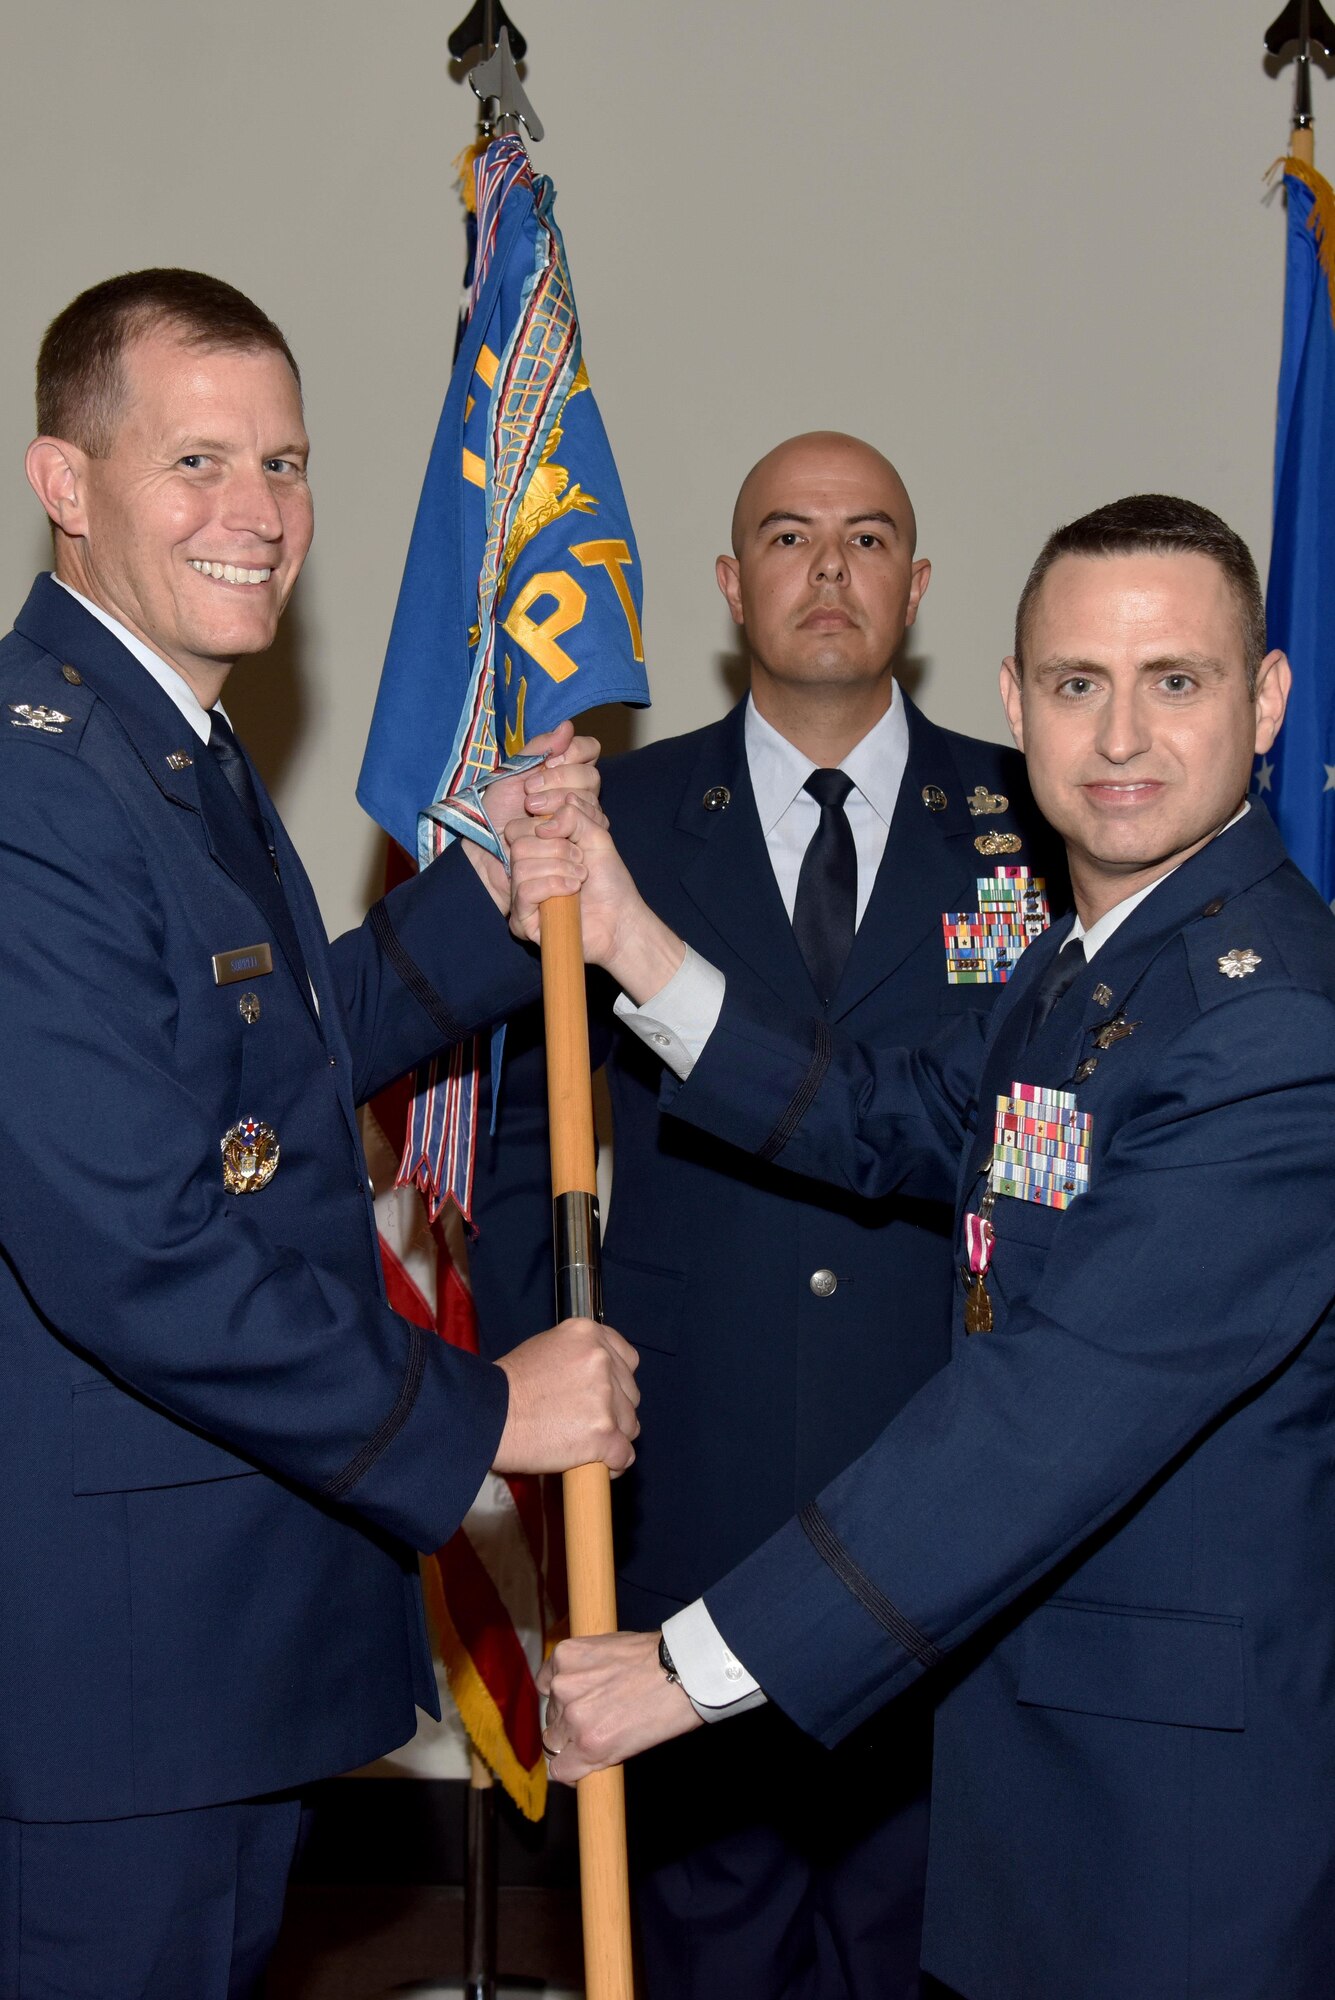 U.S. Air Force Lt. Col. Edward Harris, 17th Comptroller Squadron Commander, passes the unit guideon to Col. Jeffery Sorrell, 17th Training Wing Vice Commander, during the 17th CPTS Change of Command ceremony at the Event Center on Goodfellow Air Force Base, Texas, June 2, 2017. The event honored Harris’ service to his unit and welcomed its new commander Maj. Nelson Mitchell. (U.S. Air Force photo by Staff Sgt. Joshua Edwards/Released)